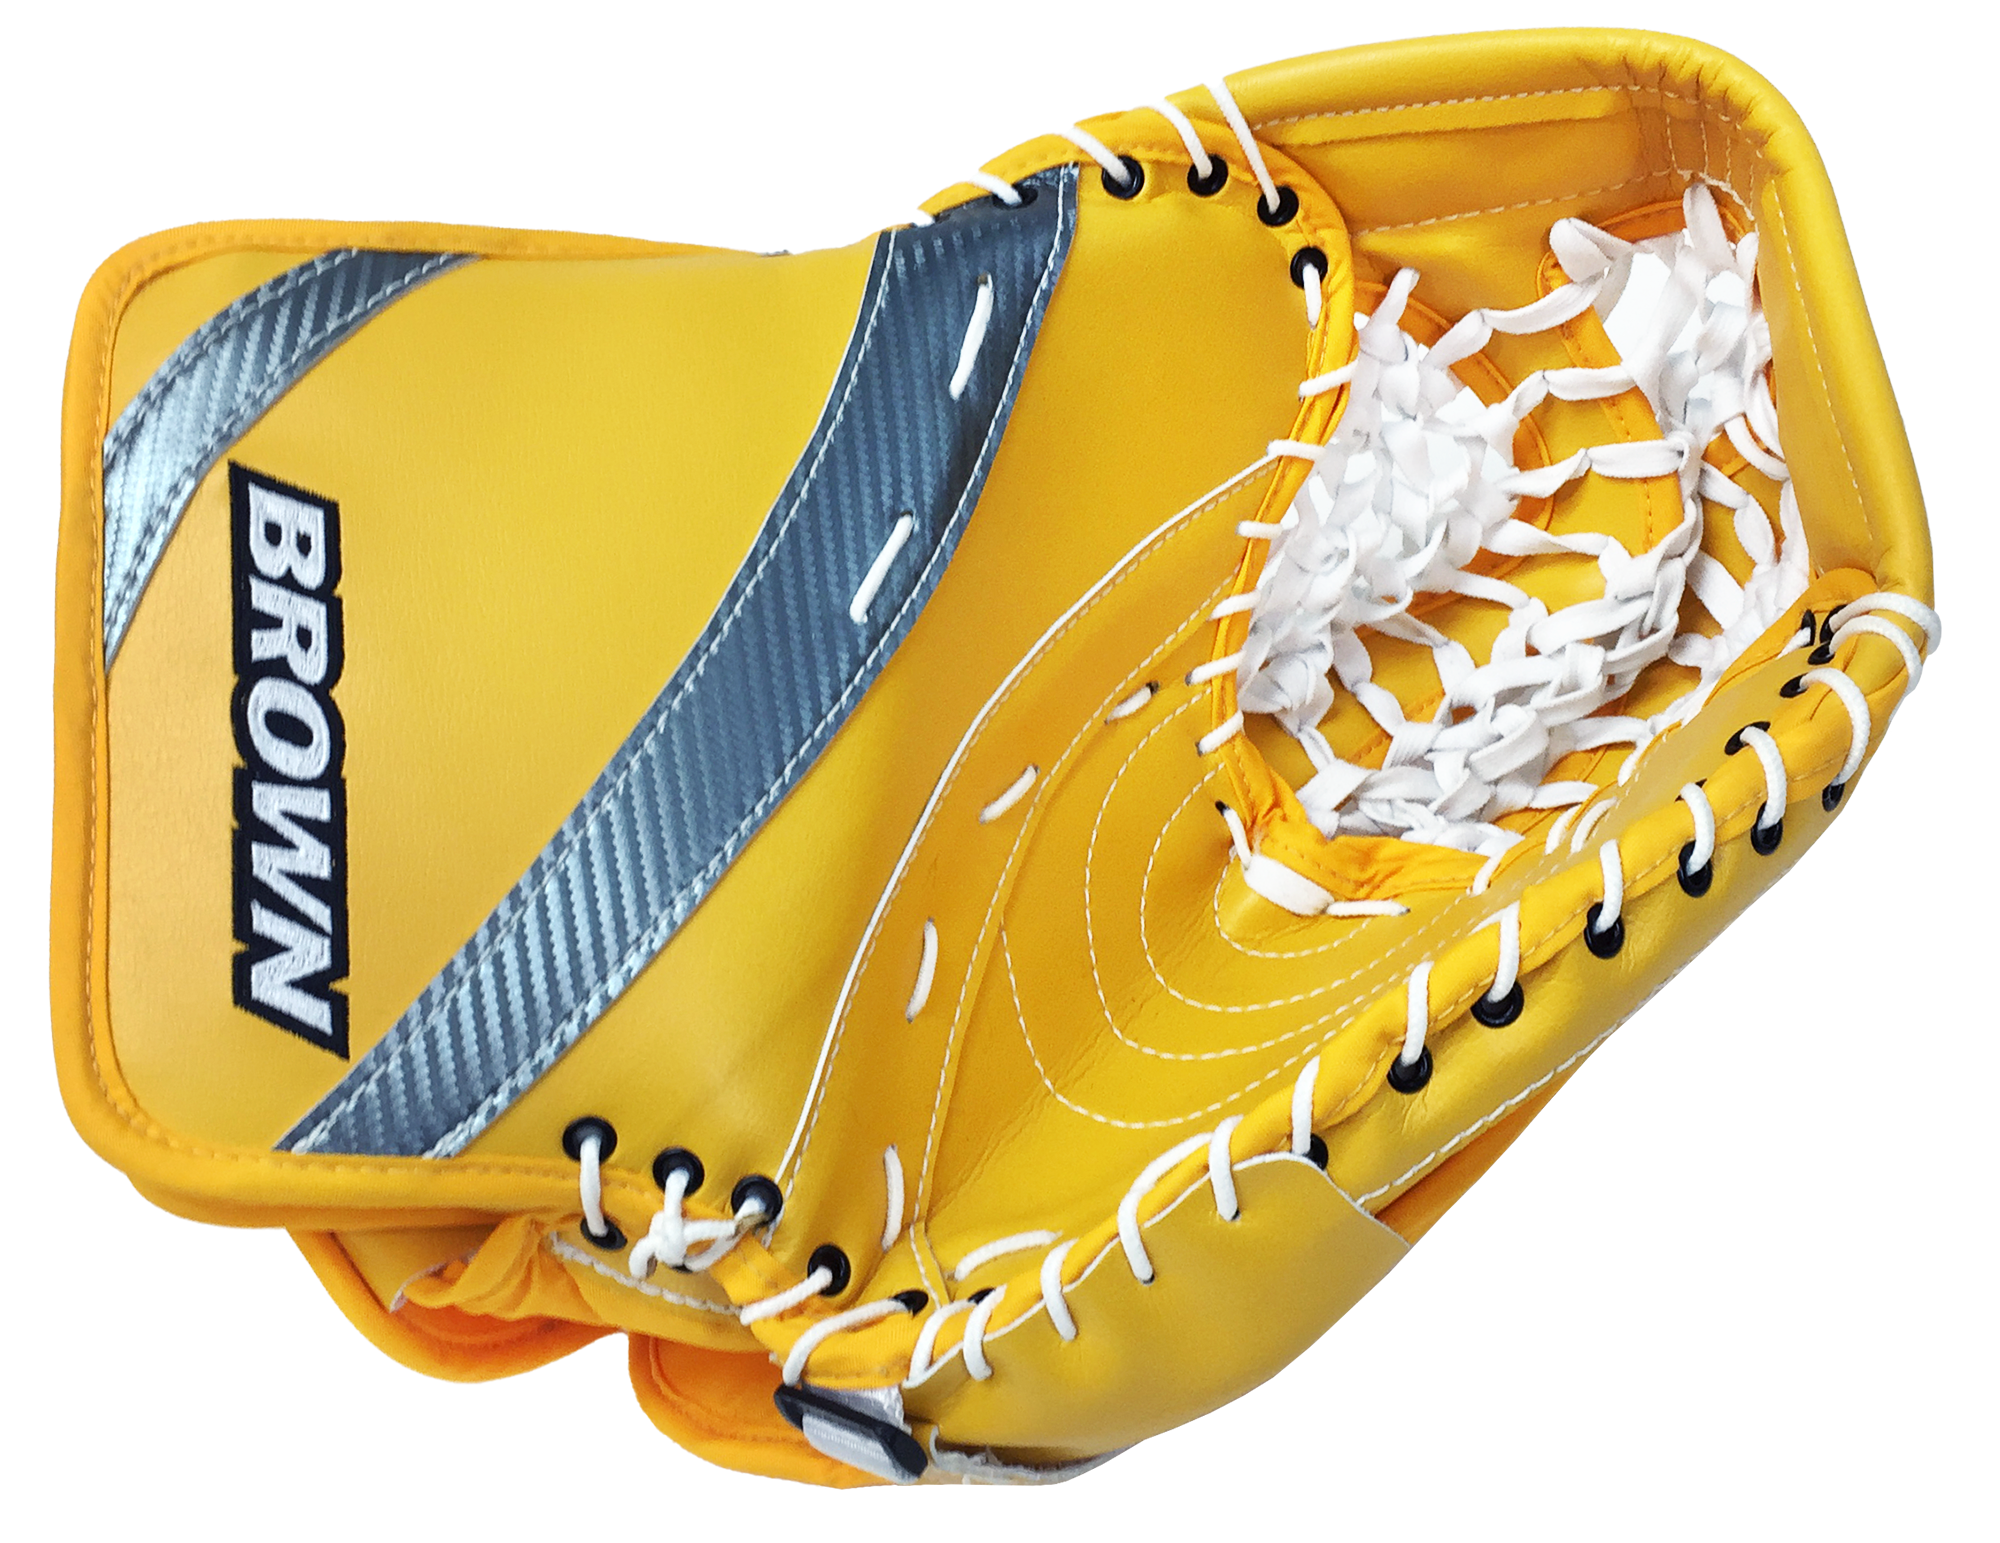 2500 catch glove in sport gold and stainless steel silver